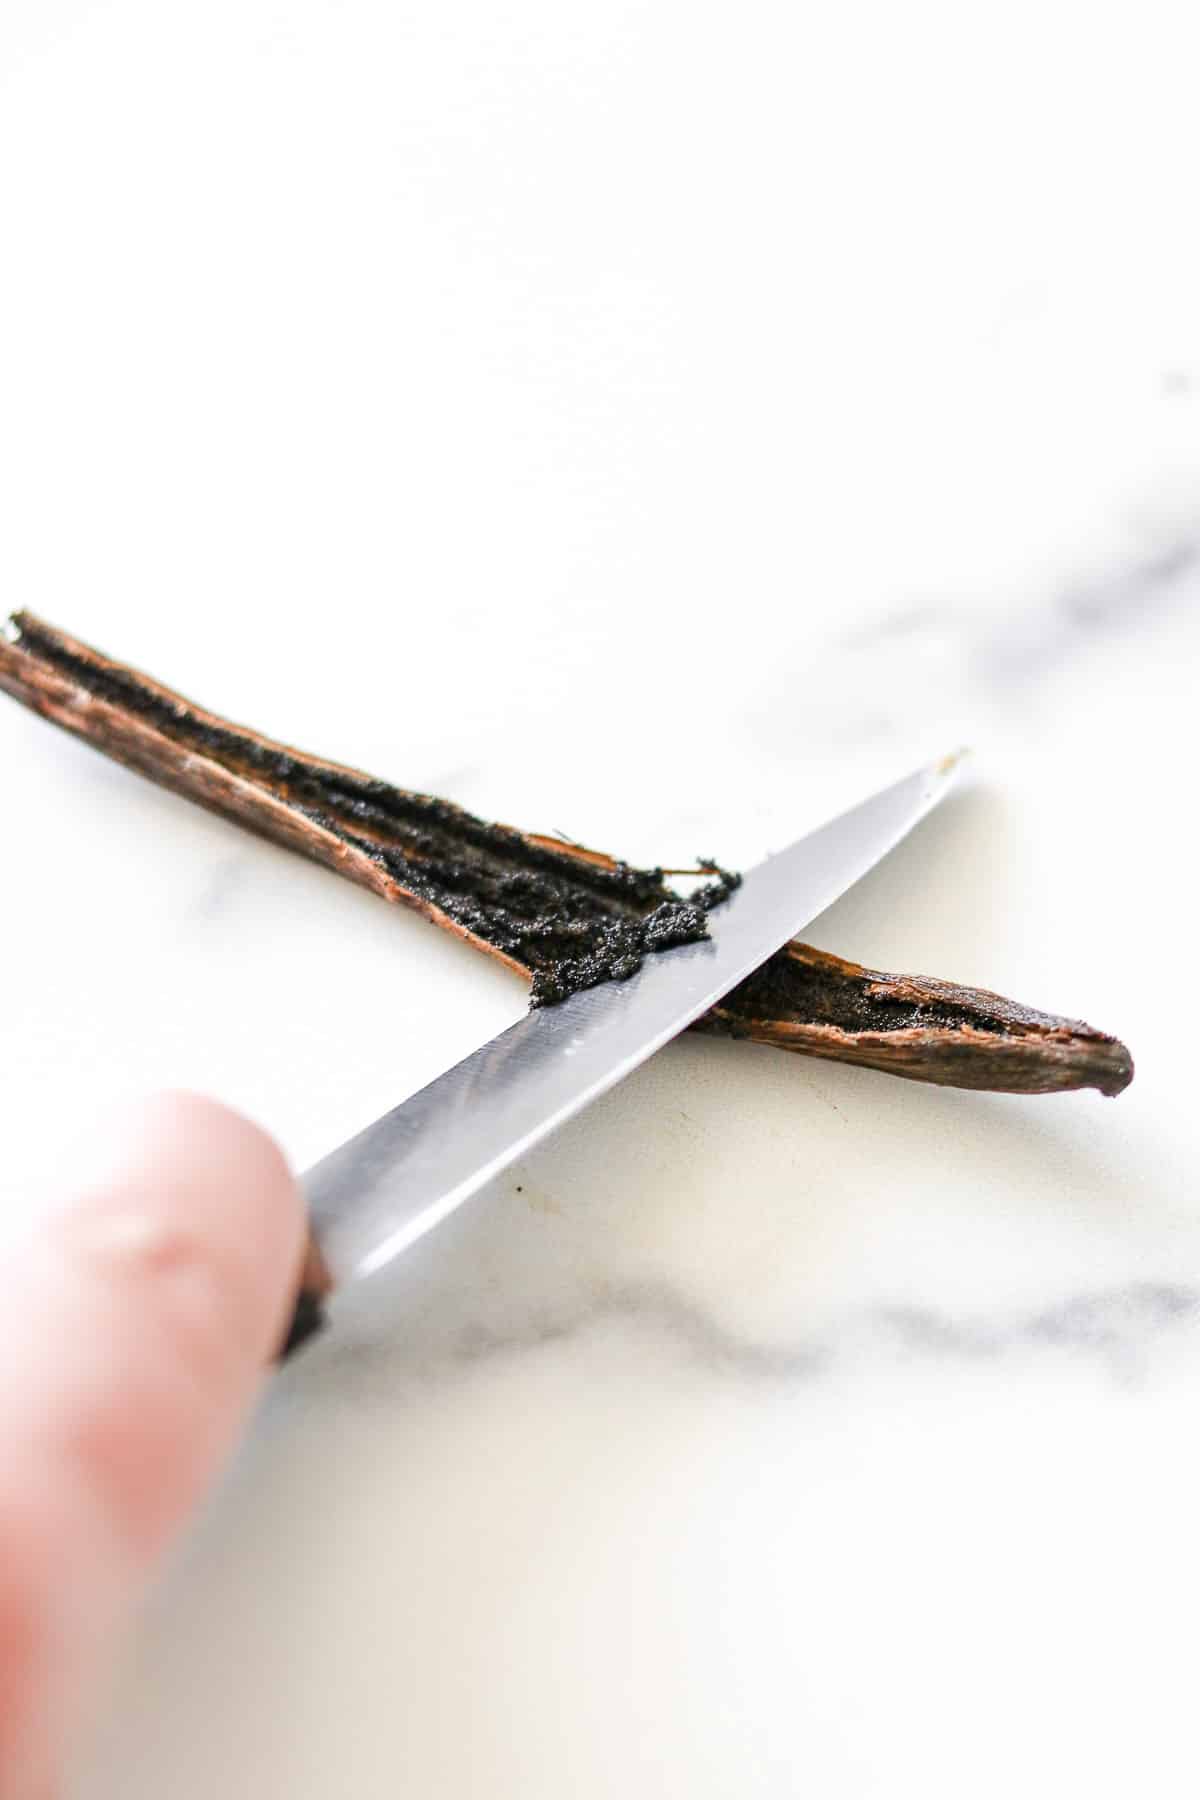 Person scraping vanilla bean paste out of a vanilla bean with the back of a knife.